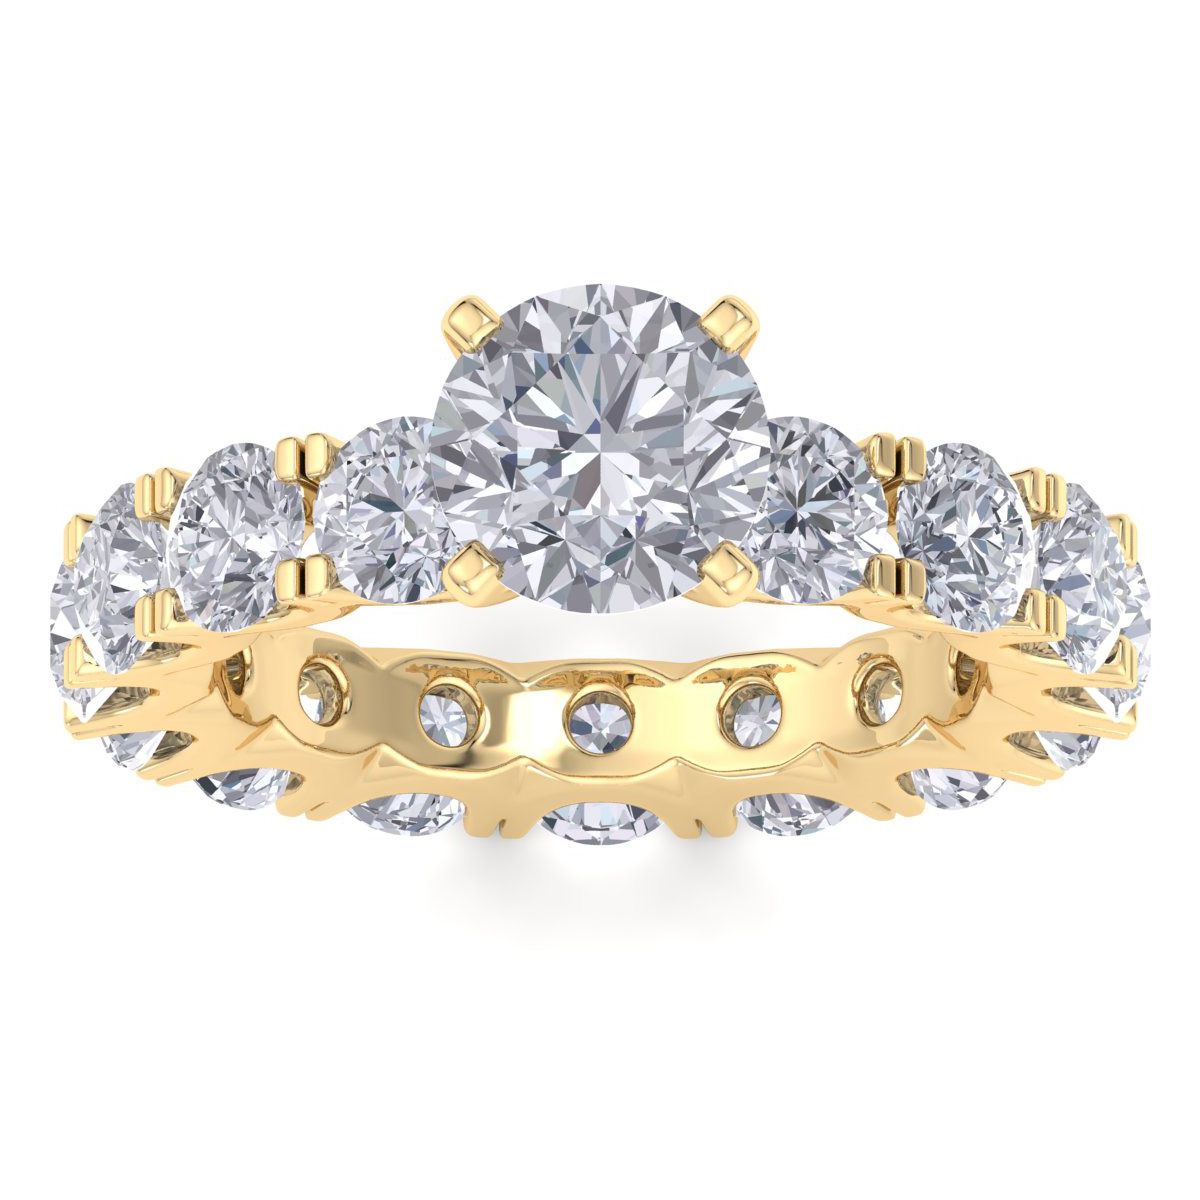 Shop Sselects 14 Karat Yellow Gold 5 1/2 Carat Lab Grown Diamond Eternity Engagement Ring With 1 1/2 Carat Round B In Silver